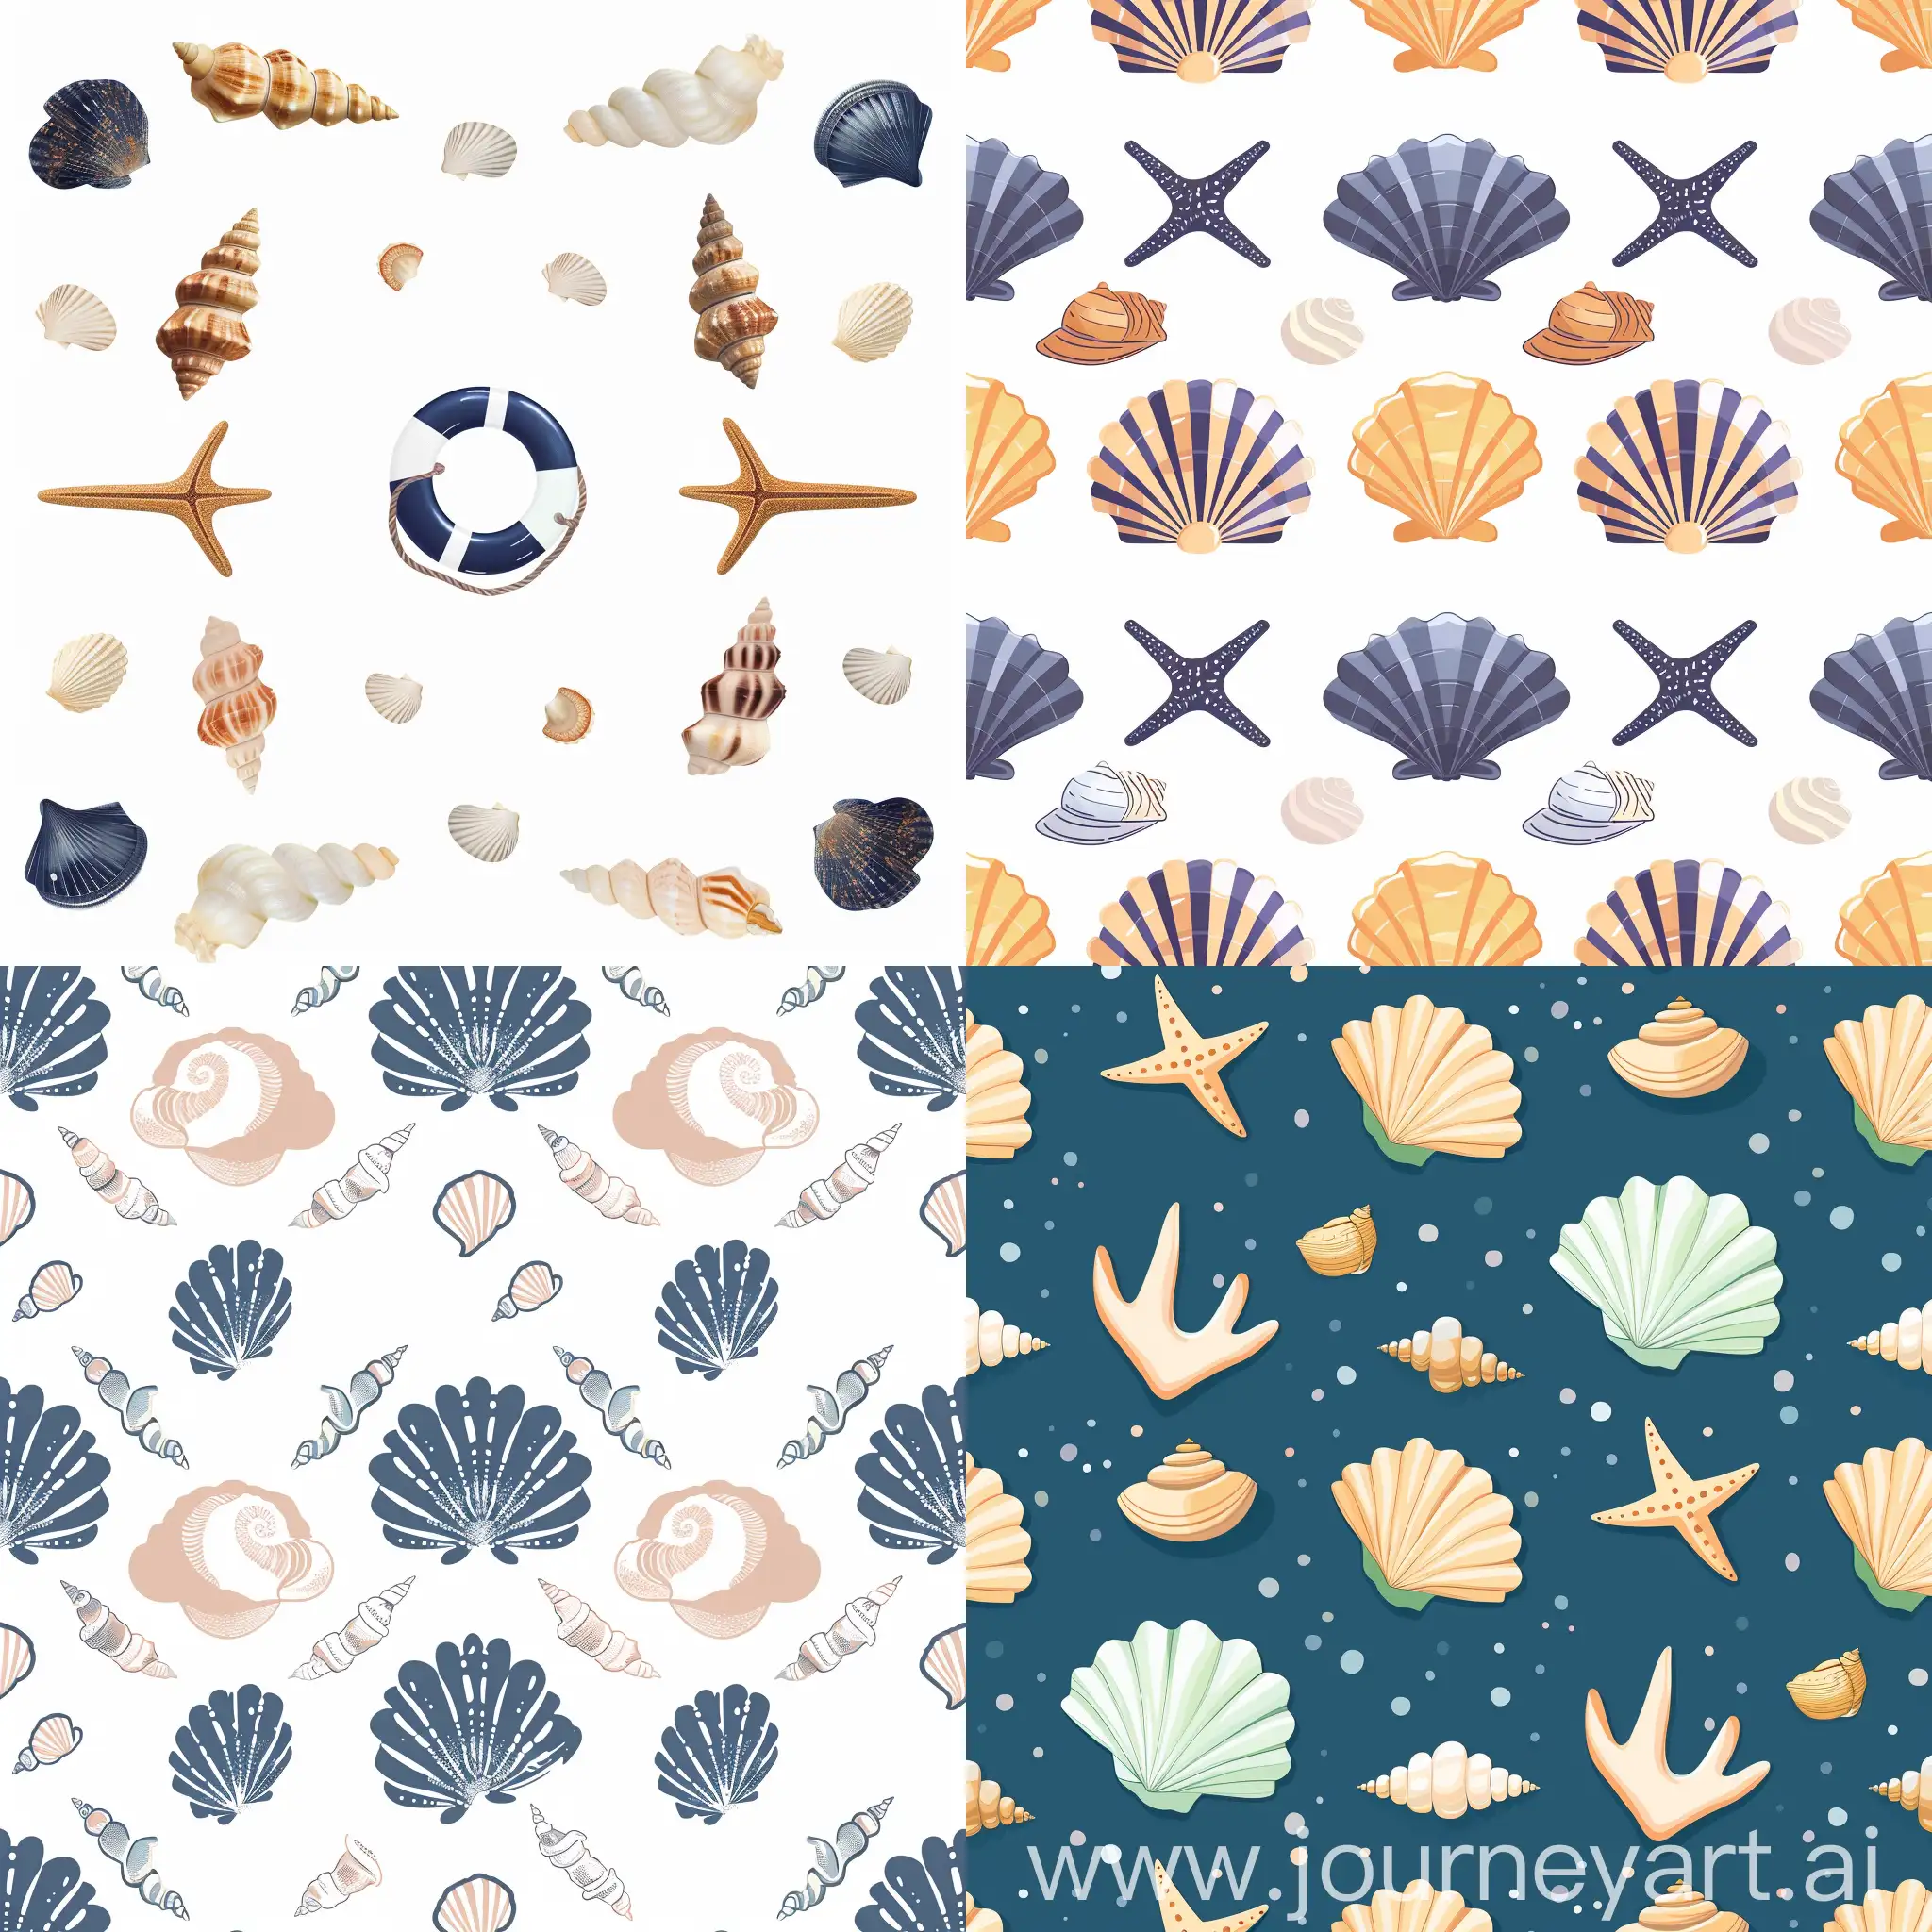 pattern design of Beachside ambiance - nautical-themed decor with seashell objects image, in high quality flat style